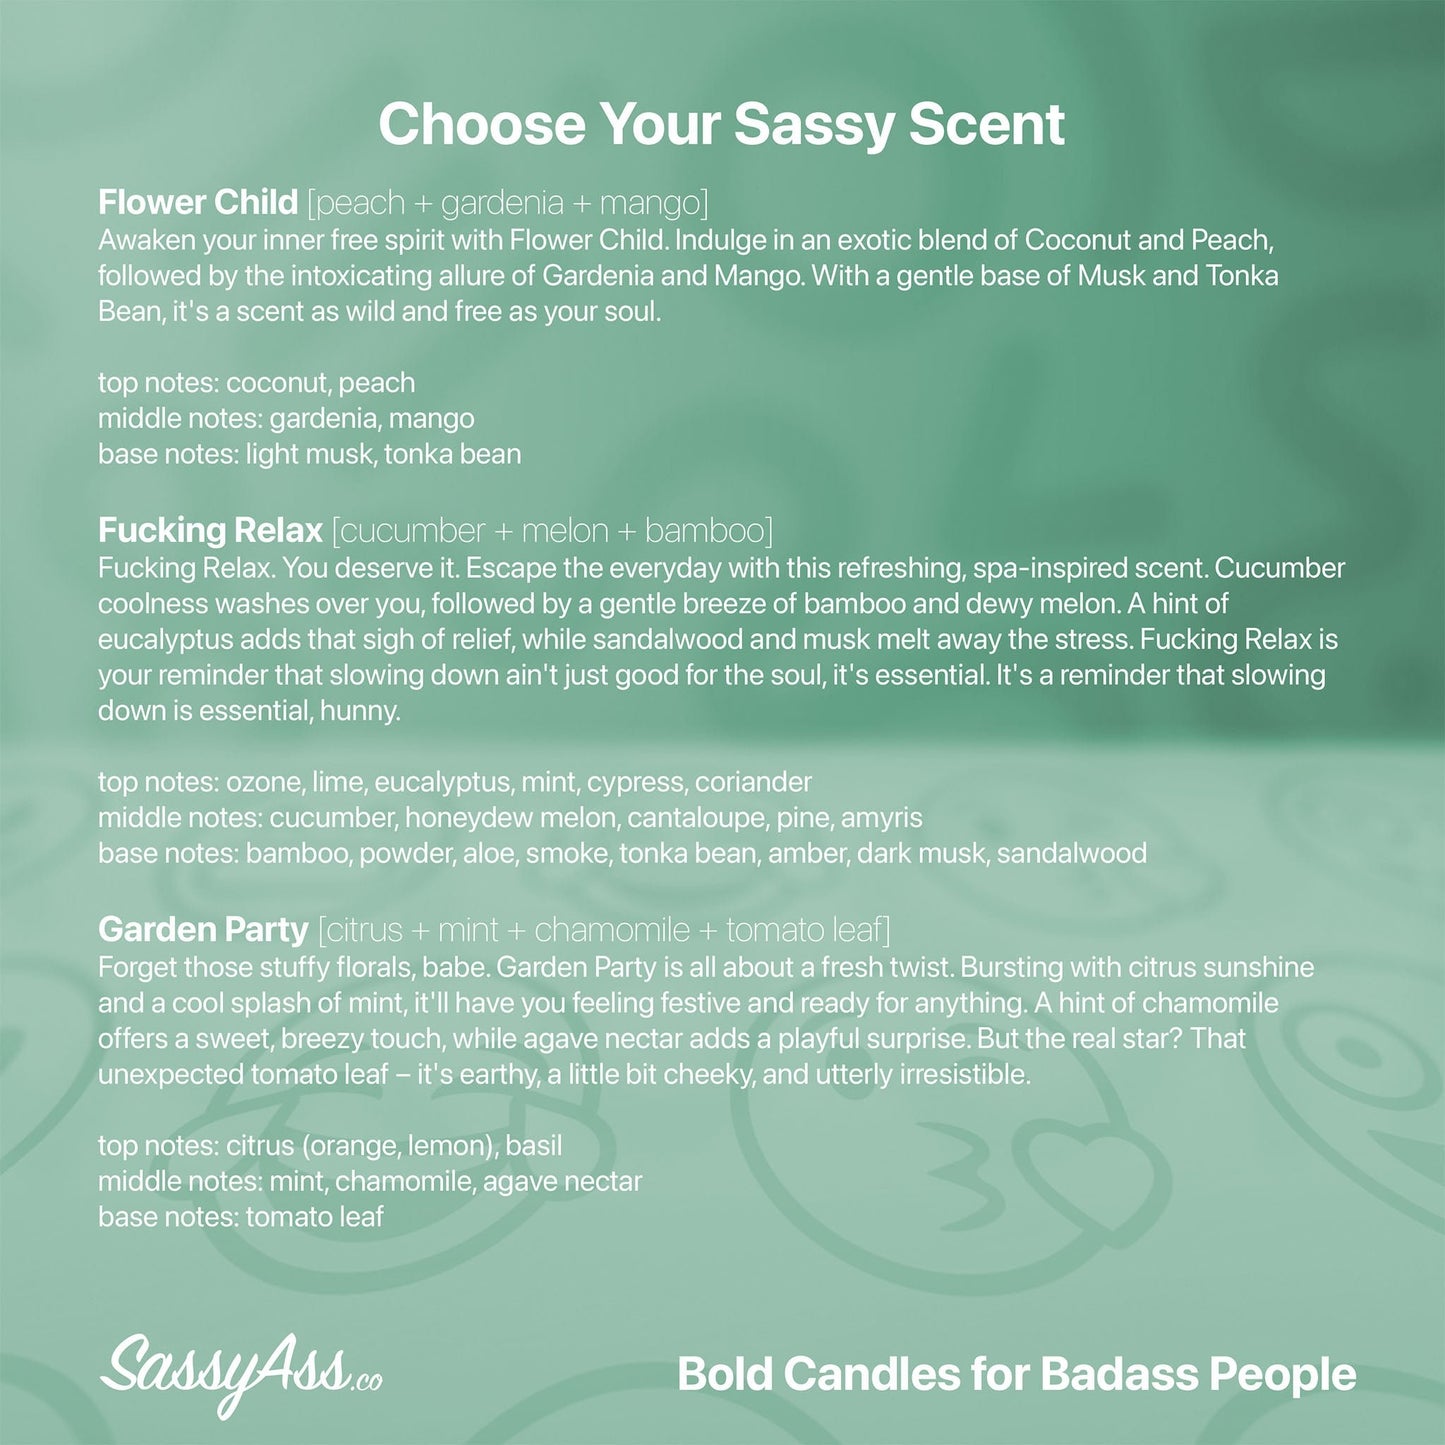 You're My Best Squirrel Friend - Drag Race Inspired Scented Soy Candle: Vegan, Hand-Poured - the back cover of the book choose your sassy scent - SassyAss.co